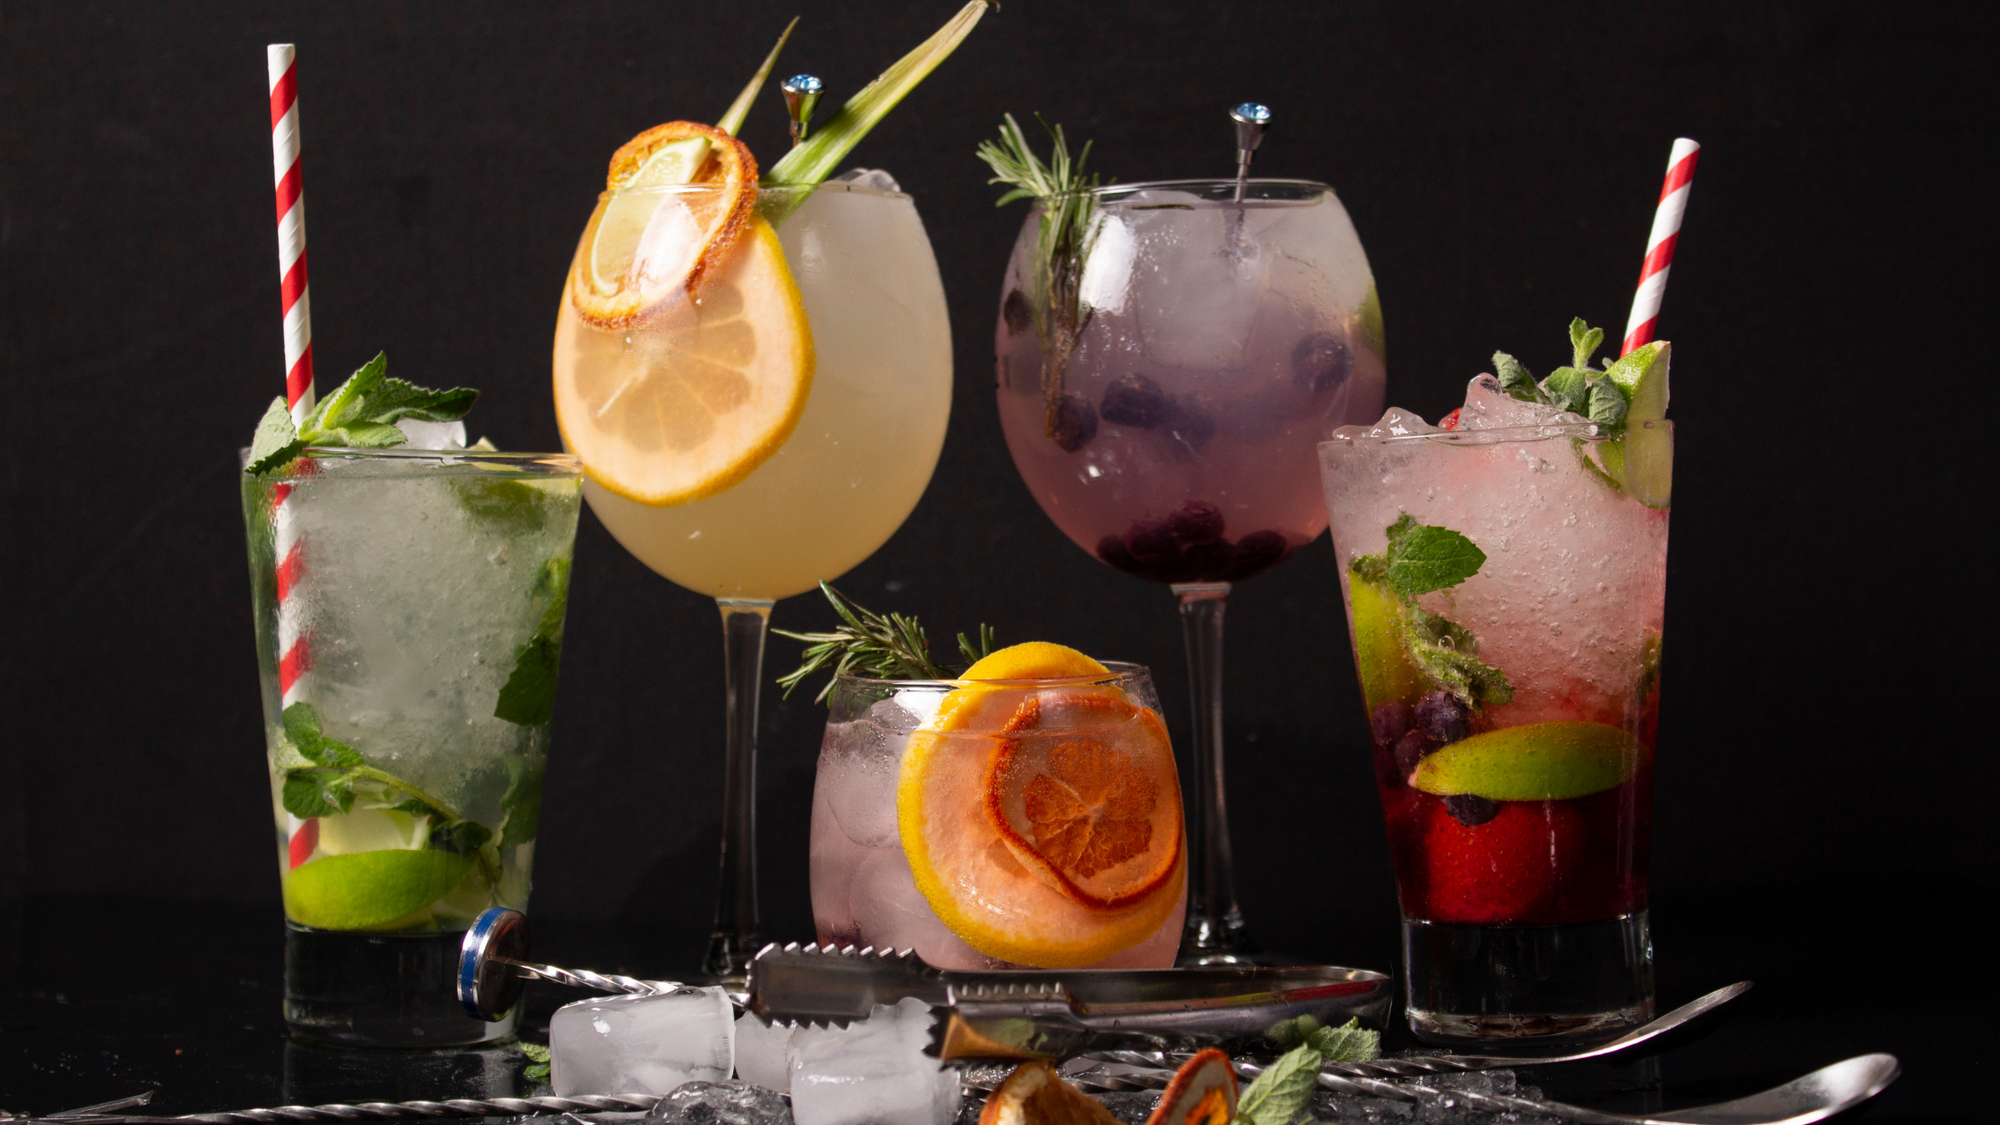 Low calorie alcoholic beverages you can enjoy this festive season